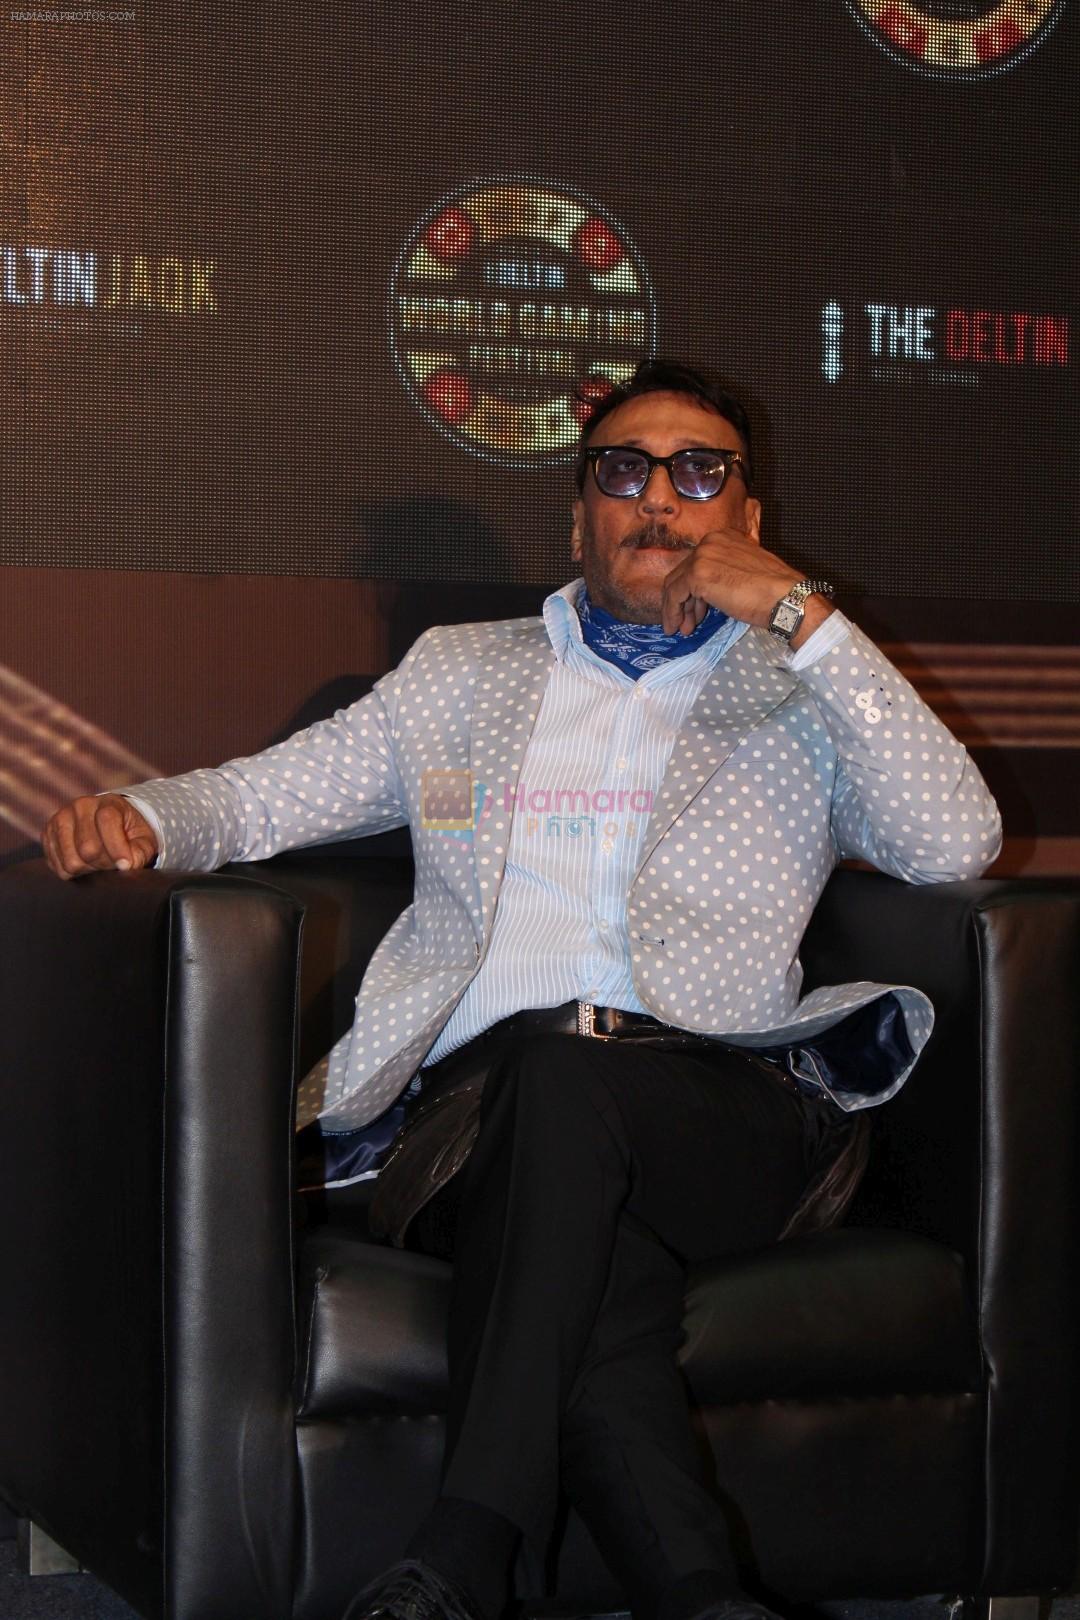 Jackie Shroff at the Launch Of Deltin World Gaming Festival on 11th Oct 2017